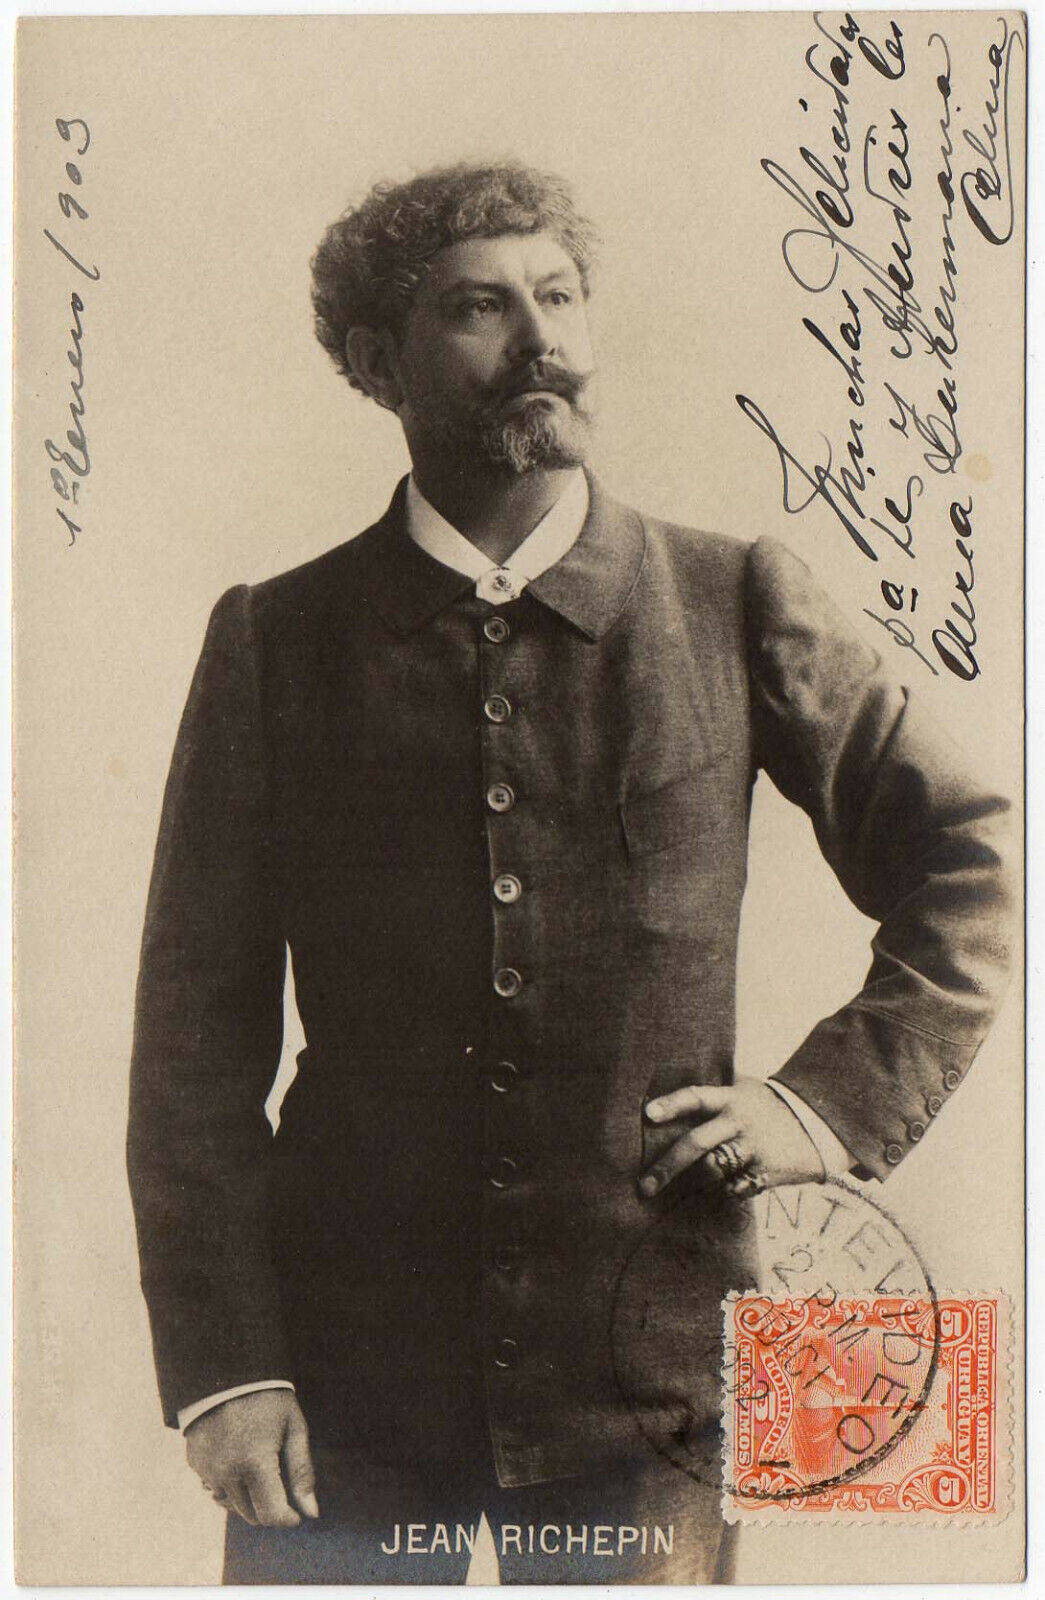 JEAN RICHEPIN FRENCH POET REAL PHOTO POSTCARD 1902